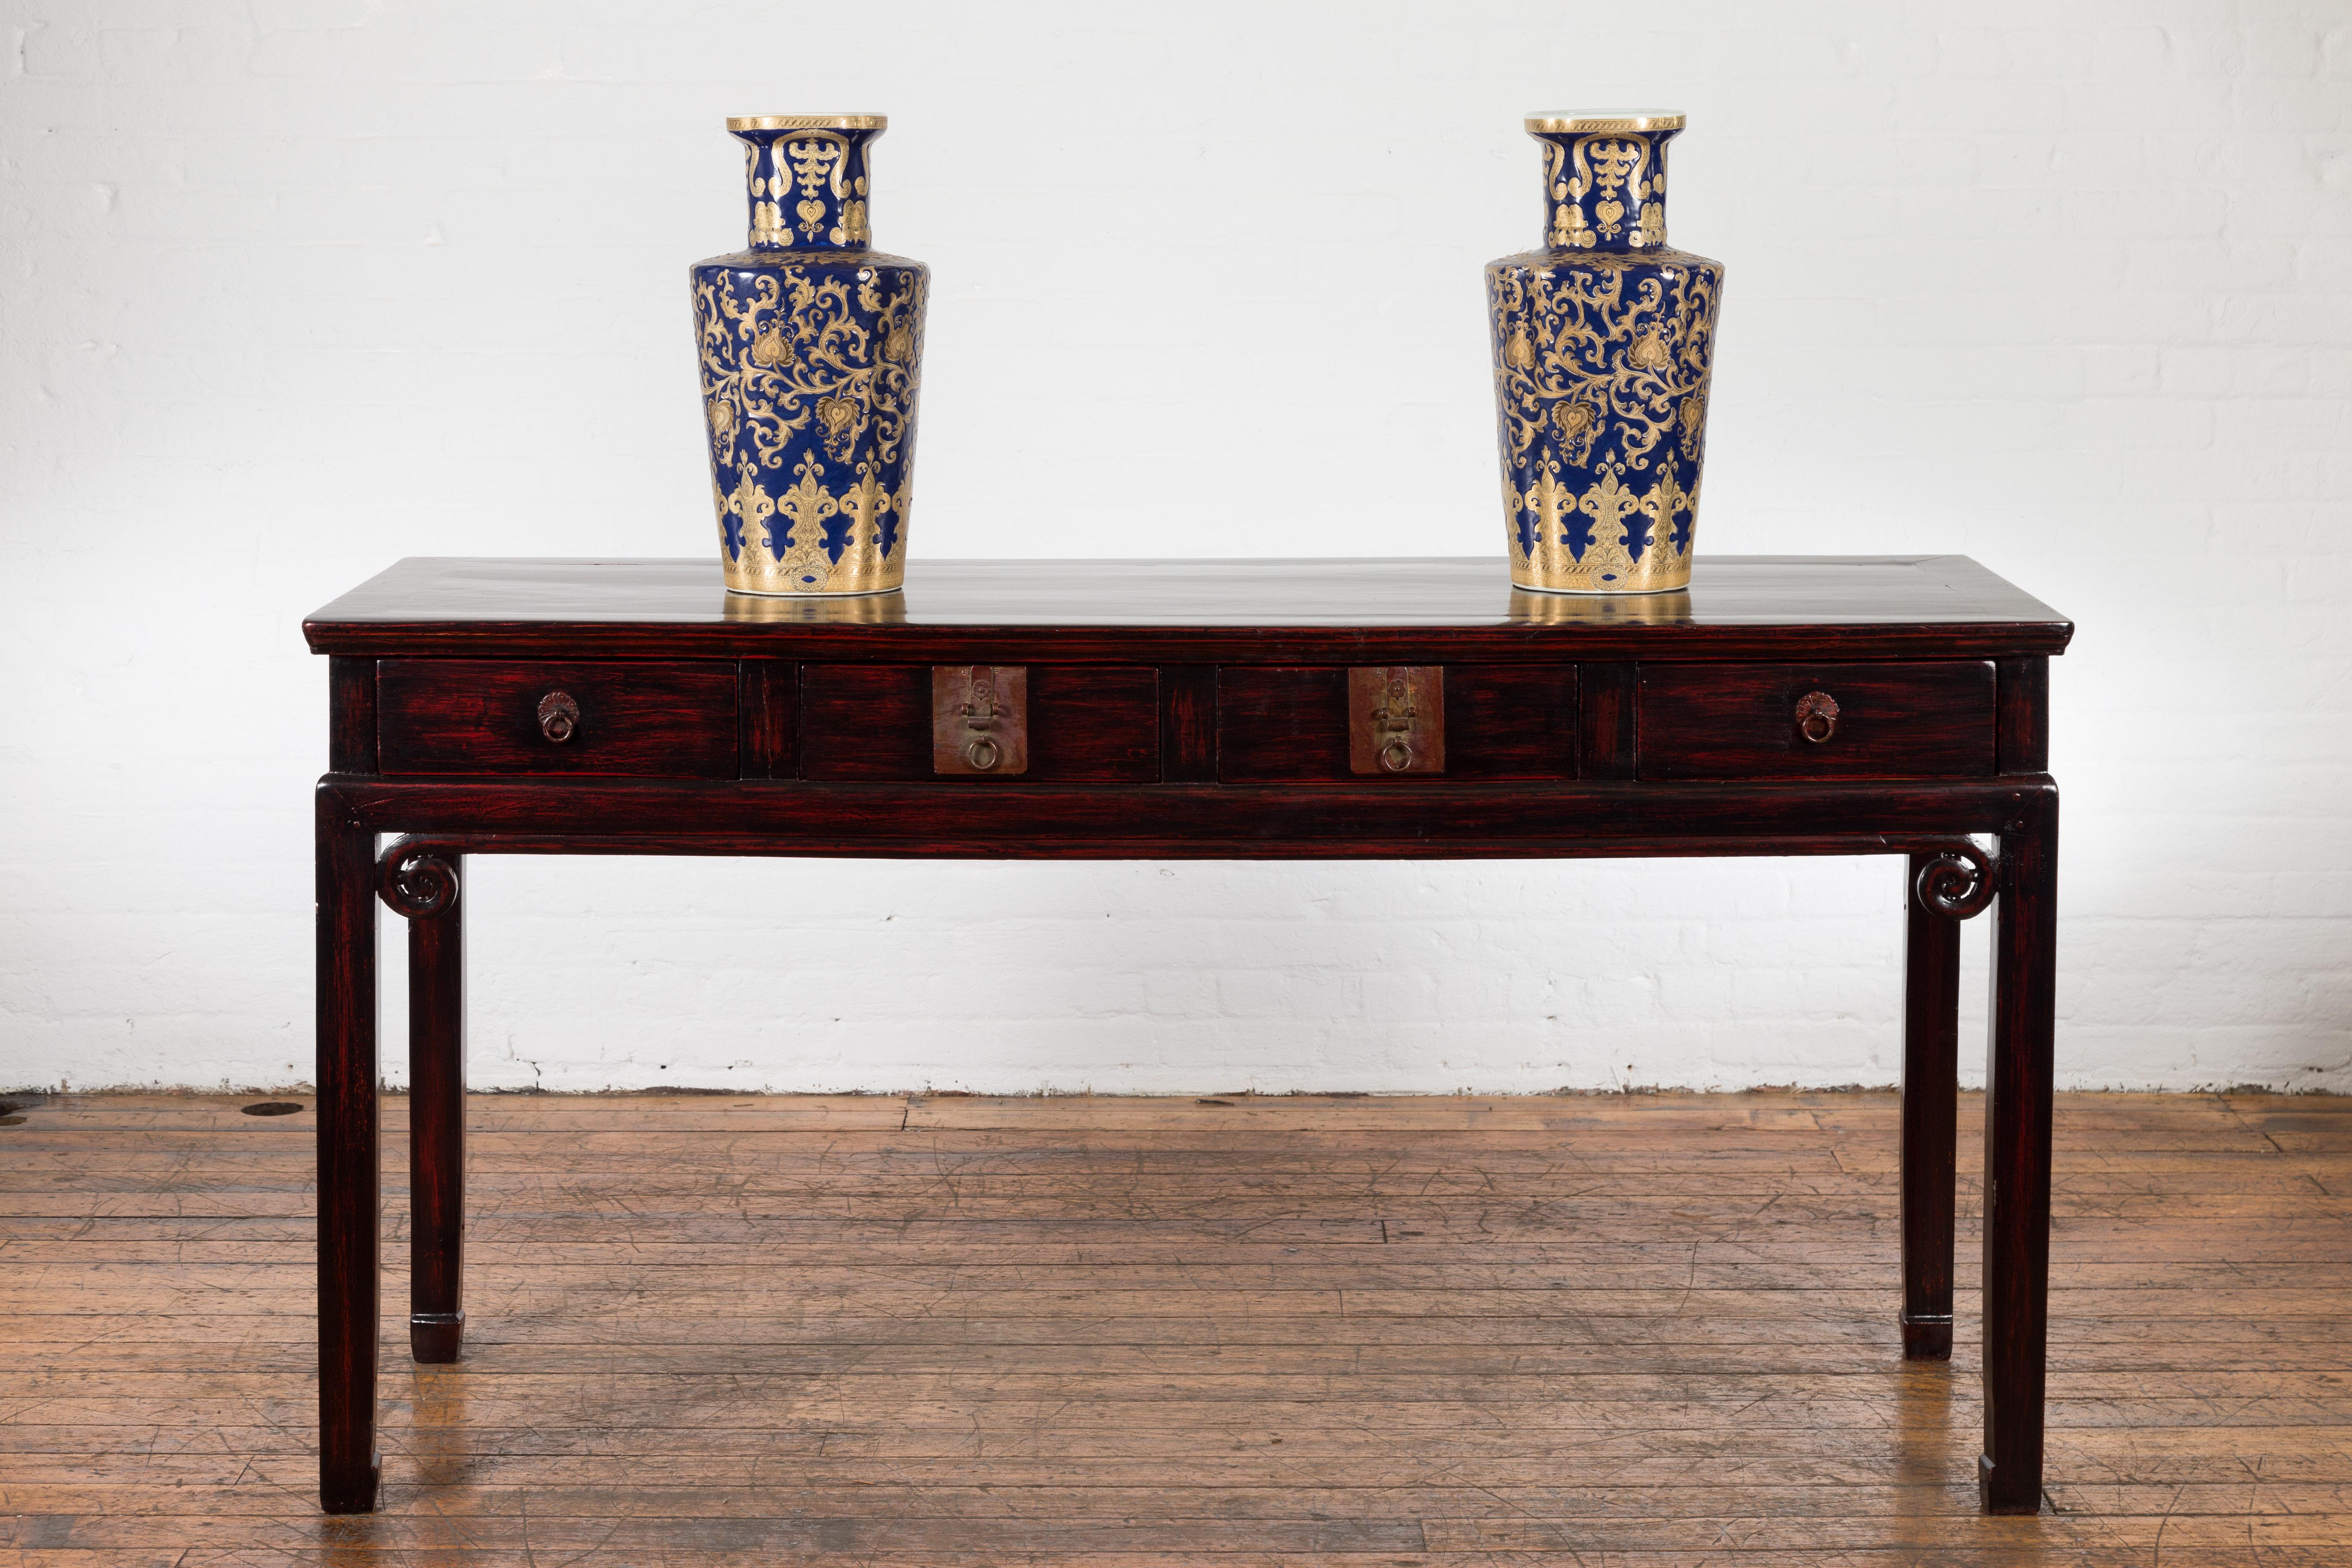 An antique Chinese late Qing Dynasty period wooden desk from the 20th century, with four drawers, carved curling scrolls, horse-hoof legs and custom black and red lacquer. Created in China during the late Qing Dynasty period in the early years of